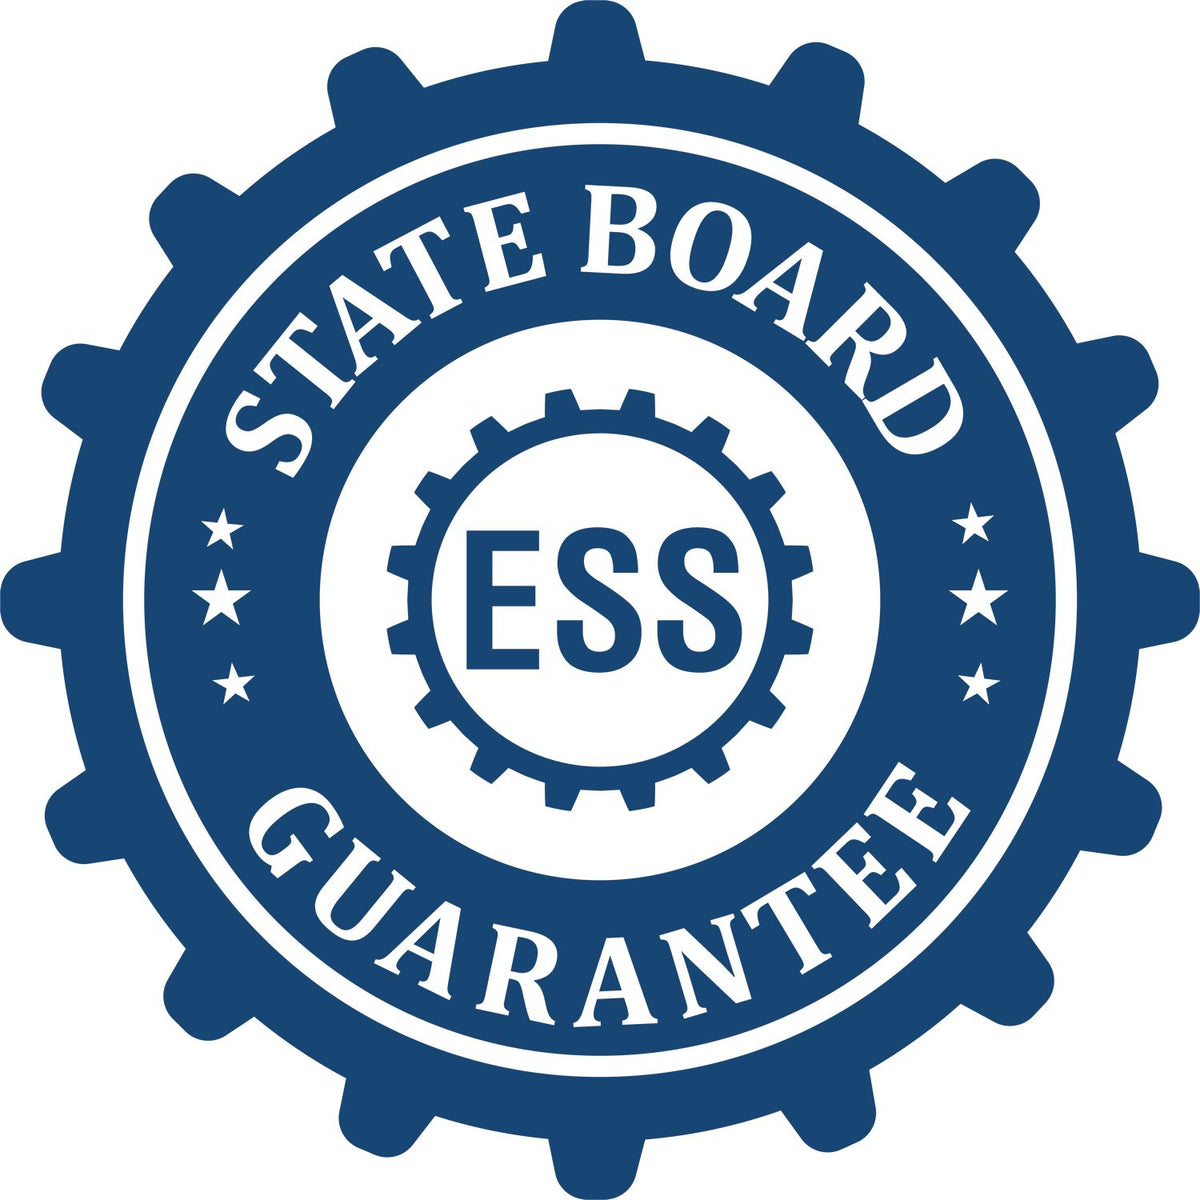 An emblem in a gear shape illustrating a state board guarantee for the Gift Delaware Land Surveyor Seal